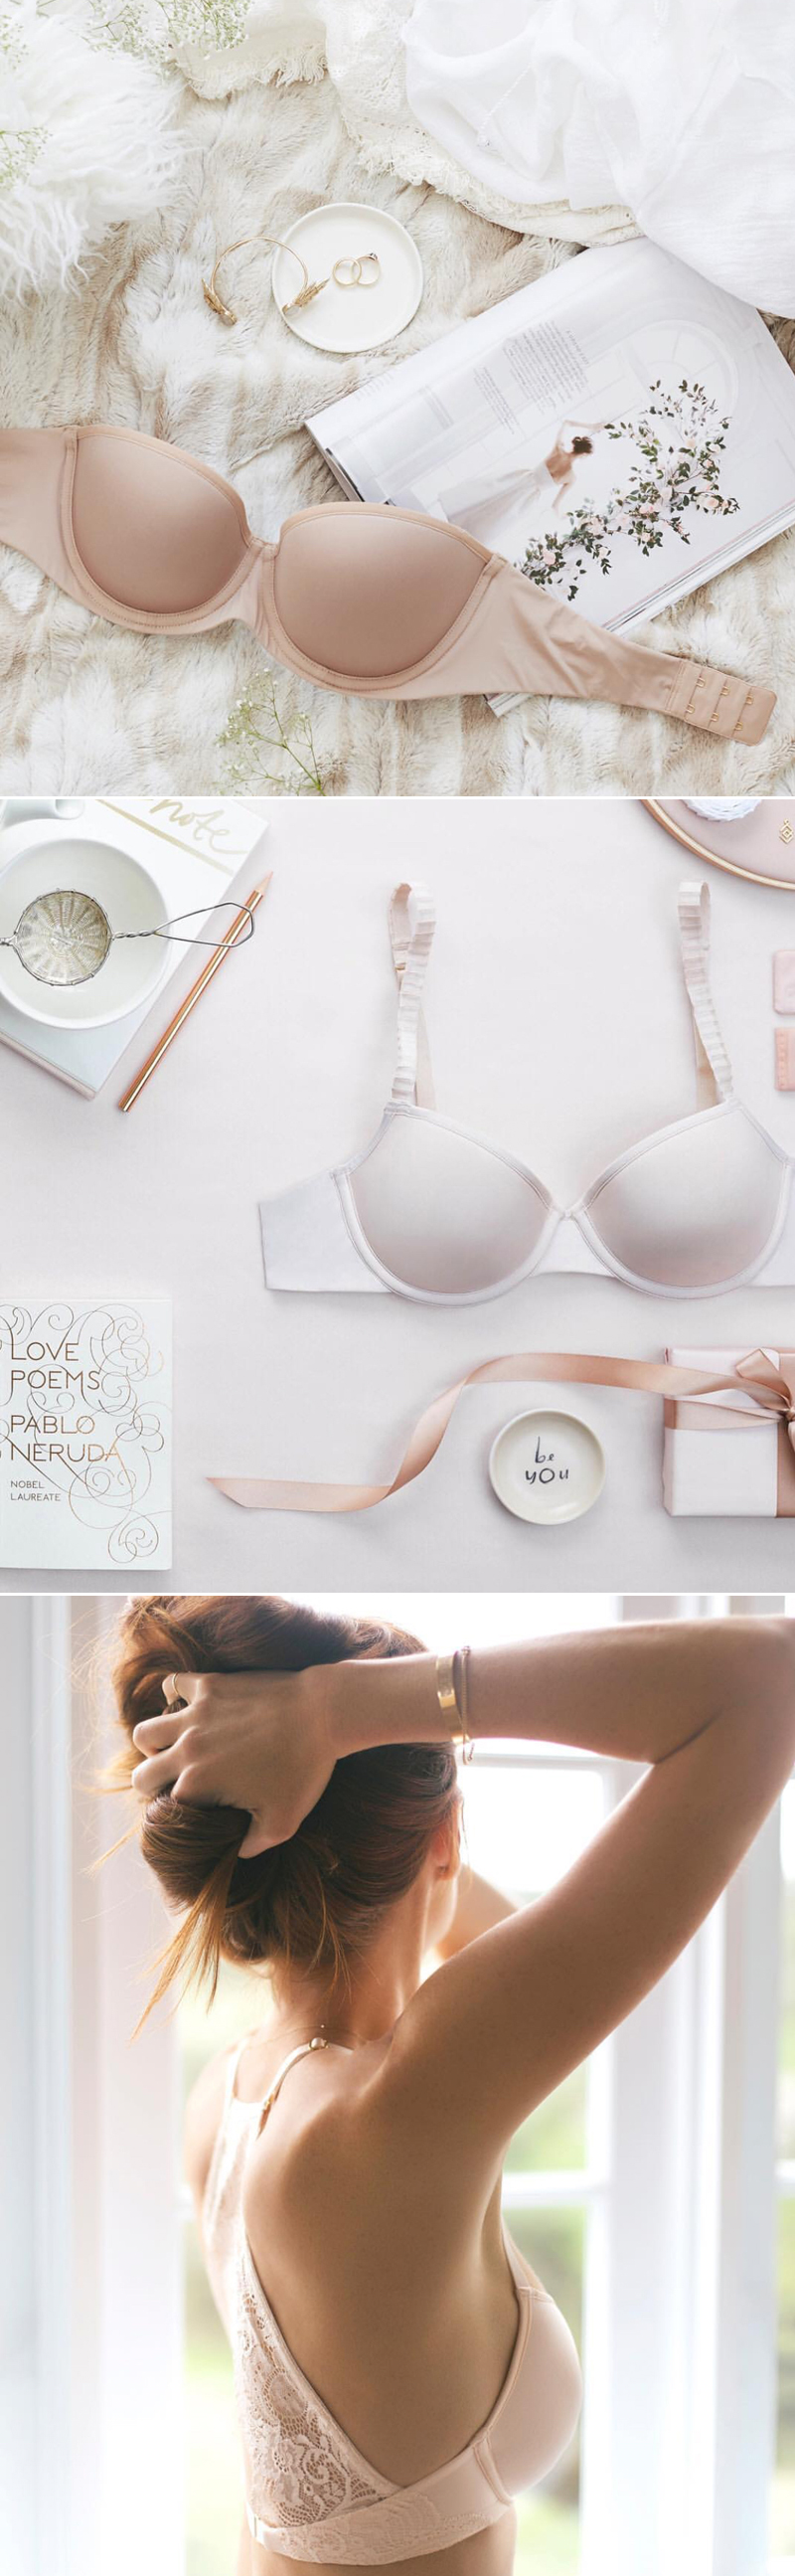 An Extraordinarily Comfortable Bra For Every Moment - ThirdLove Creates the  Perfect Fit Just For You! - Praise Wedding